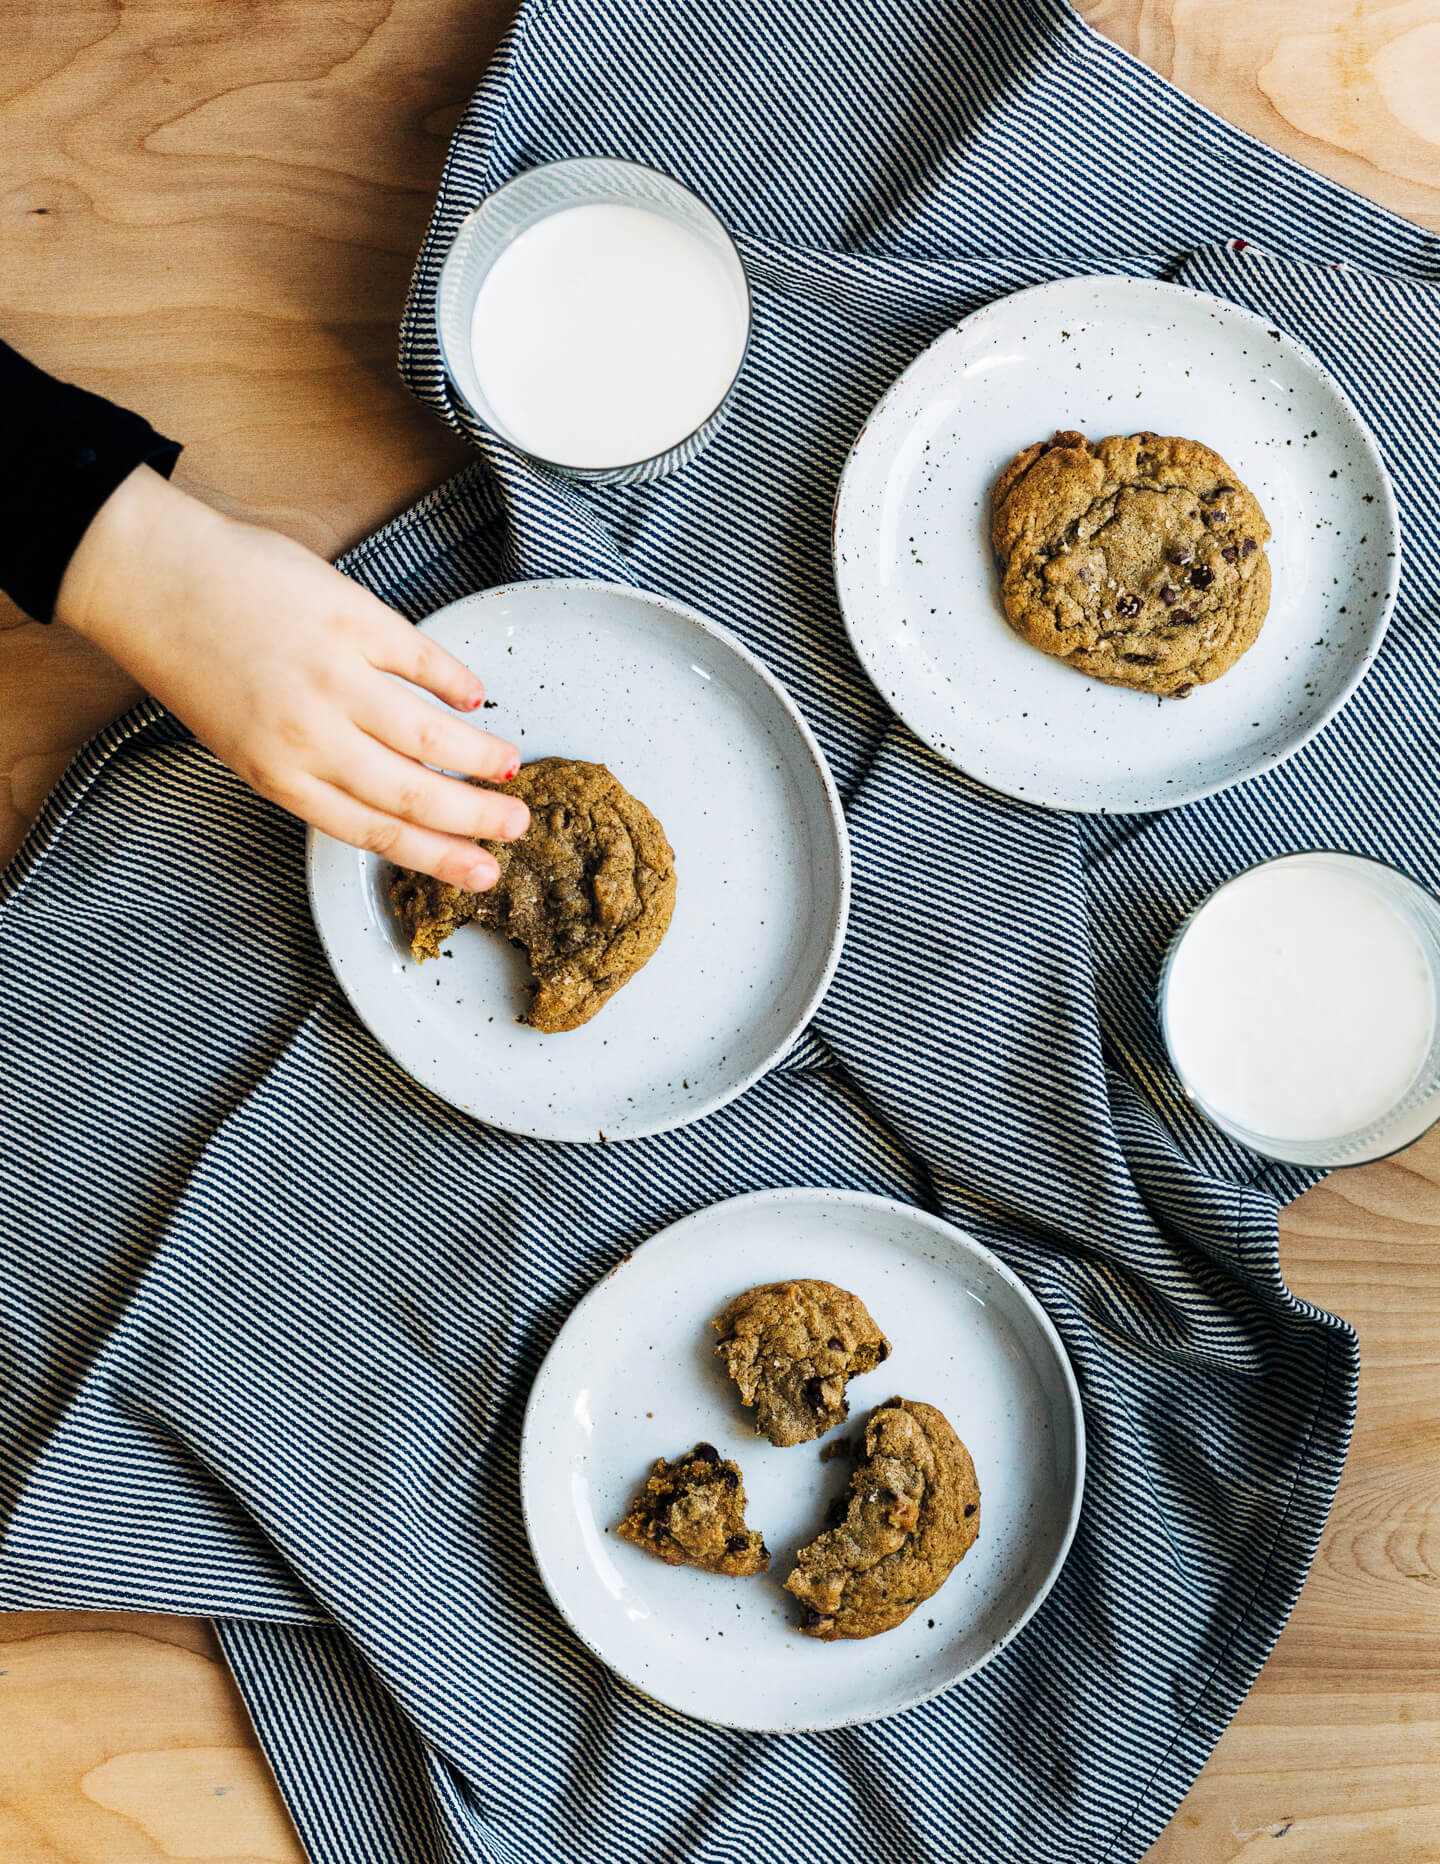 These nutty rye chocolate chip cookies are made with fragrant toasted rye flour and a few extra drizzles of molasses.